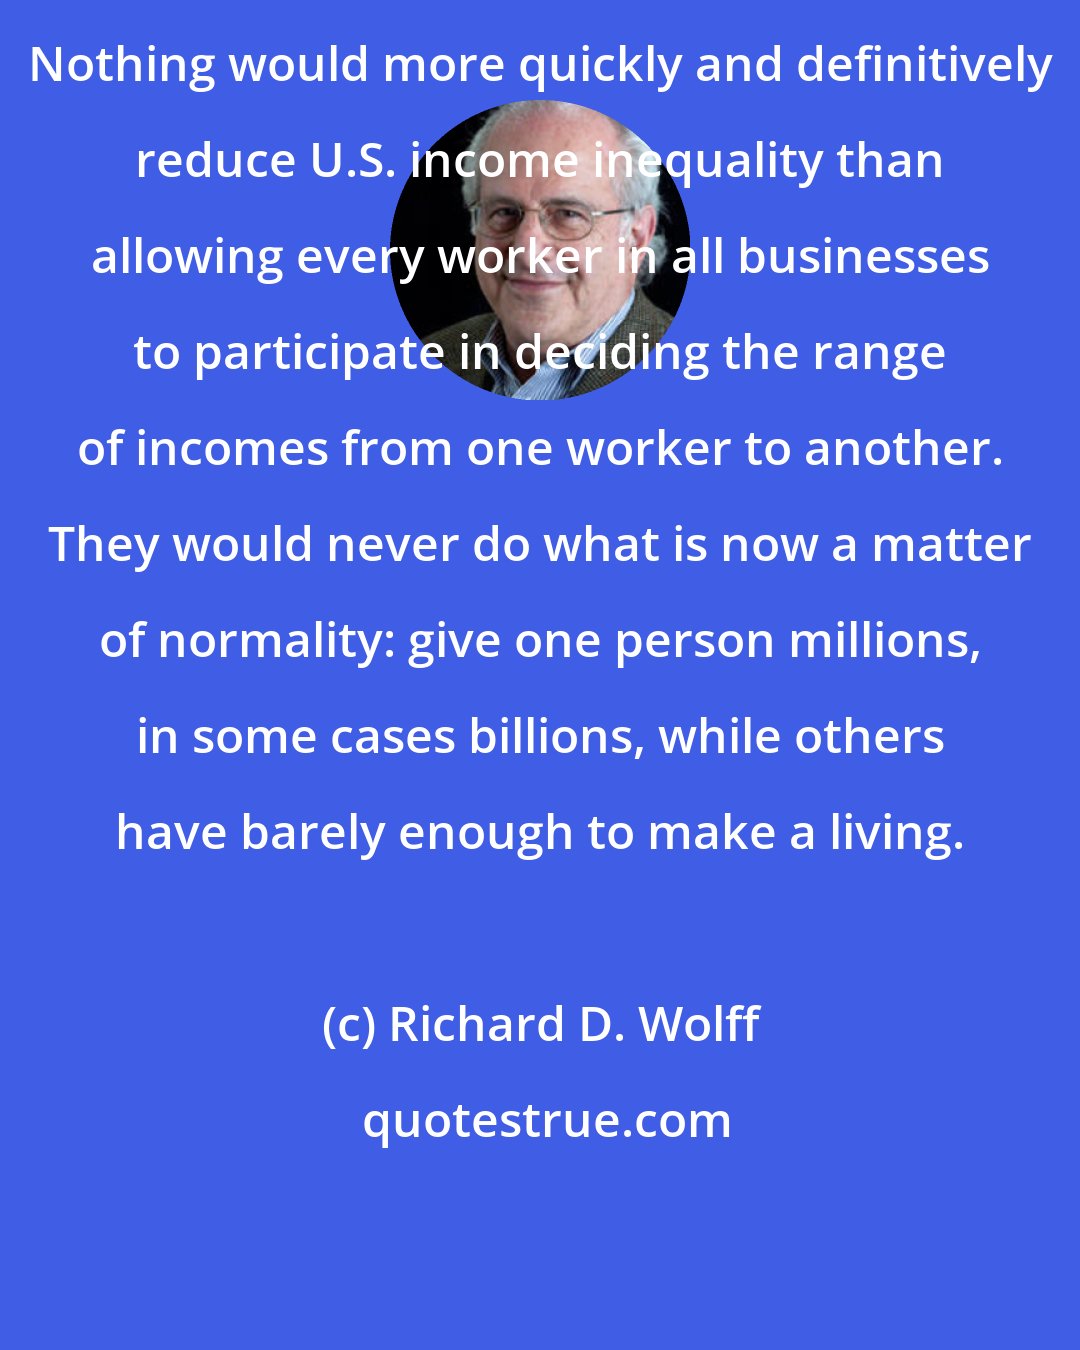 Richard D. Wolff: Nothing would more quickly and definitively reduce U.S. income inequality than allowing every worker in all businesses to participate in deciding the range of incomes from one worker to another. They would never do what is now a matter of normality: give one person millions, in some cases billions, while others have barely enough to make a living.